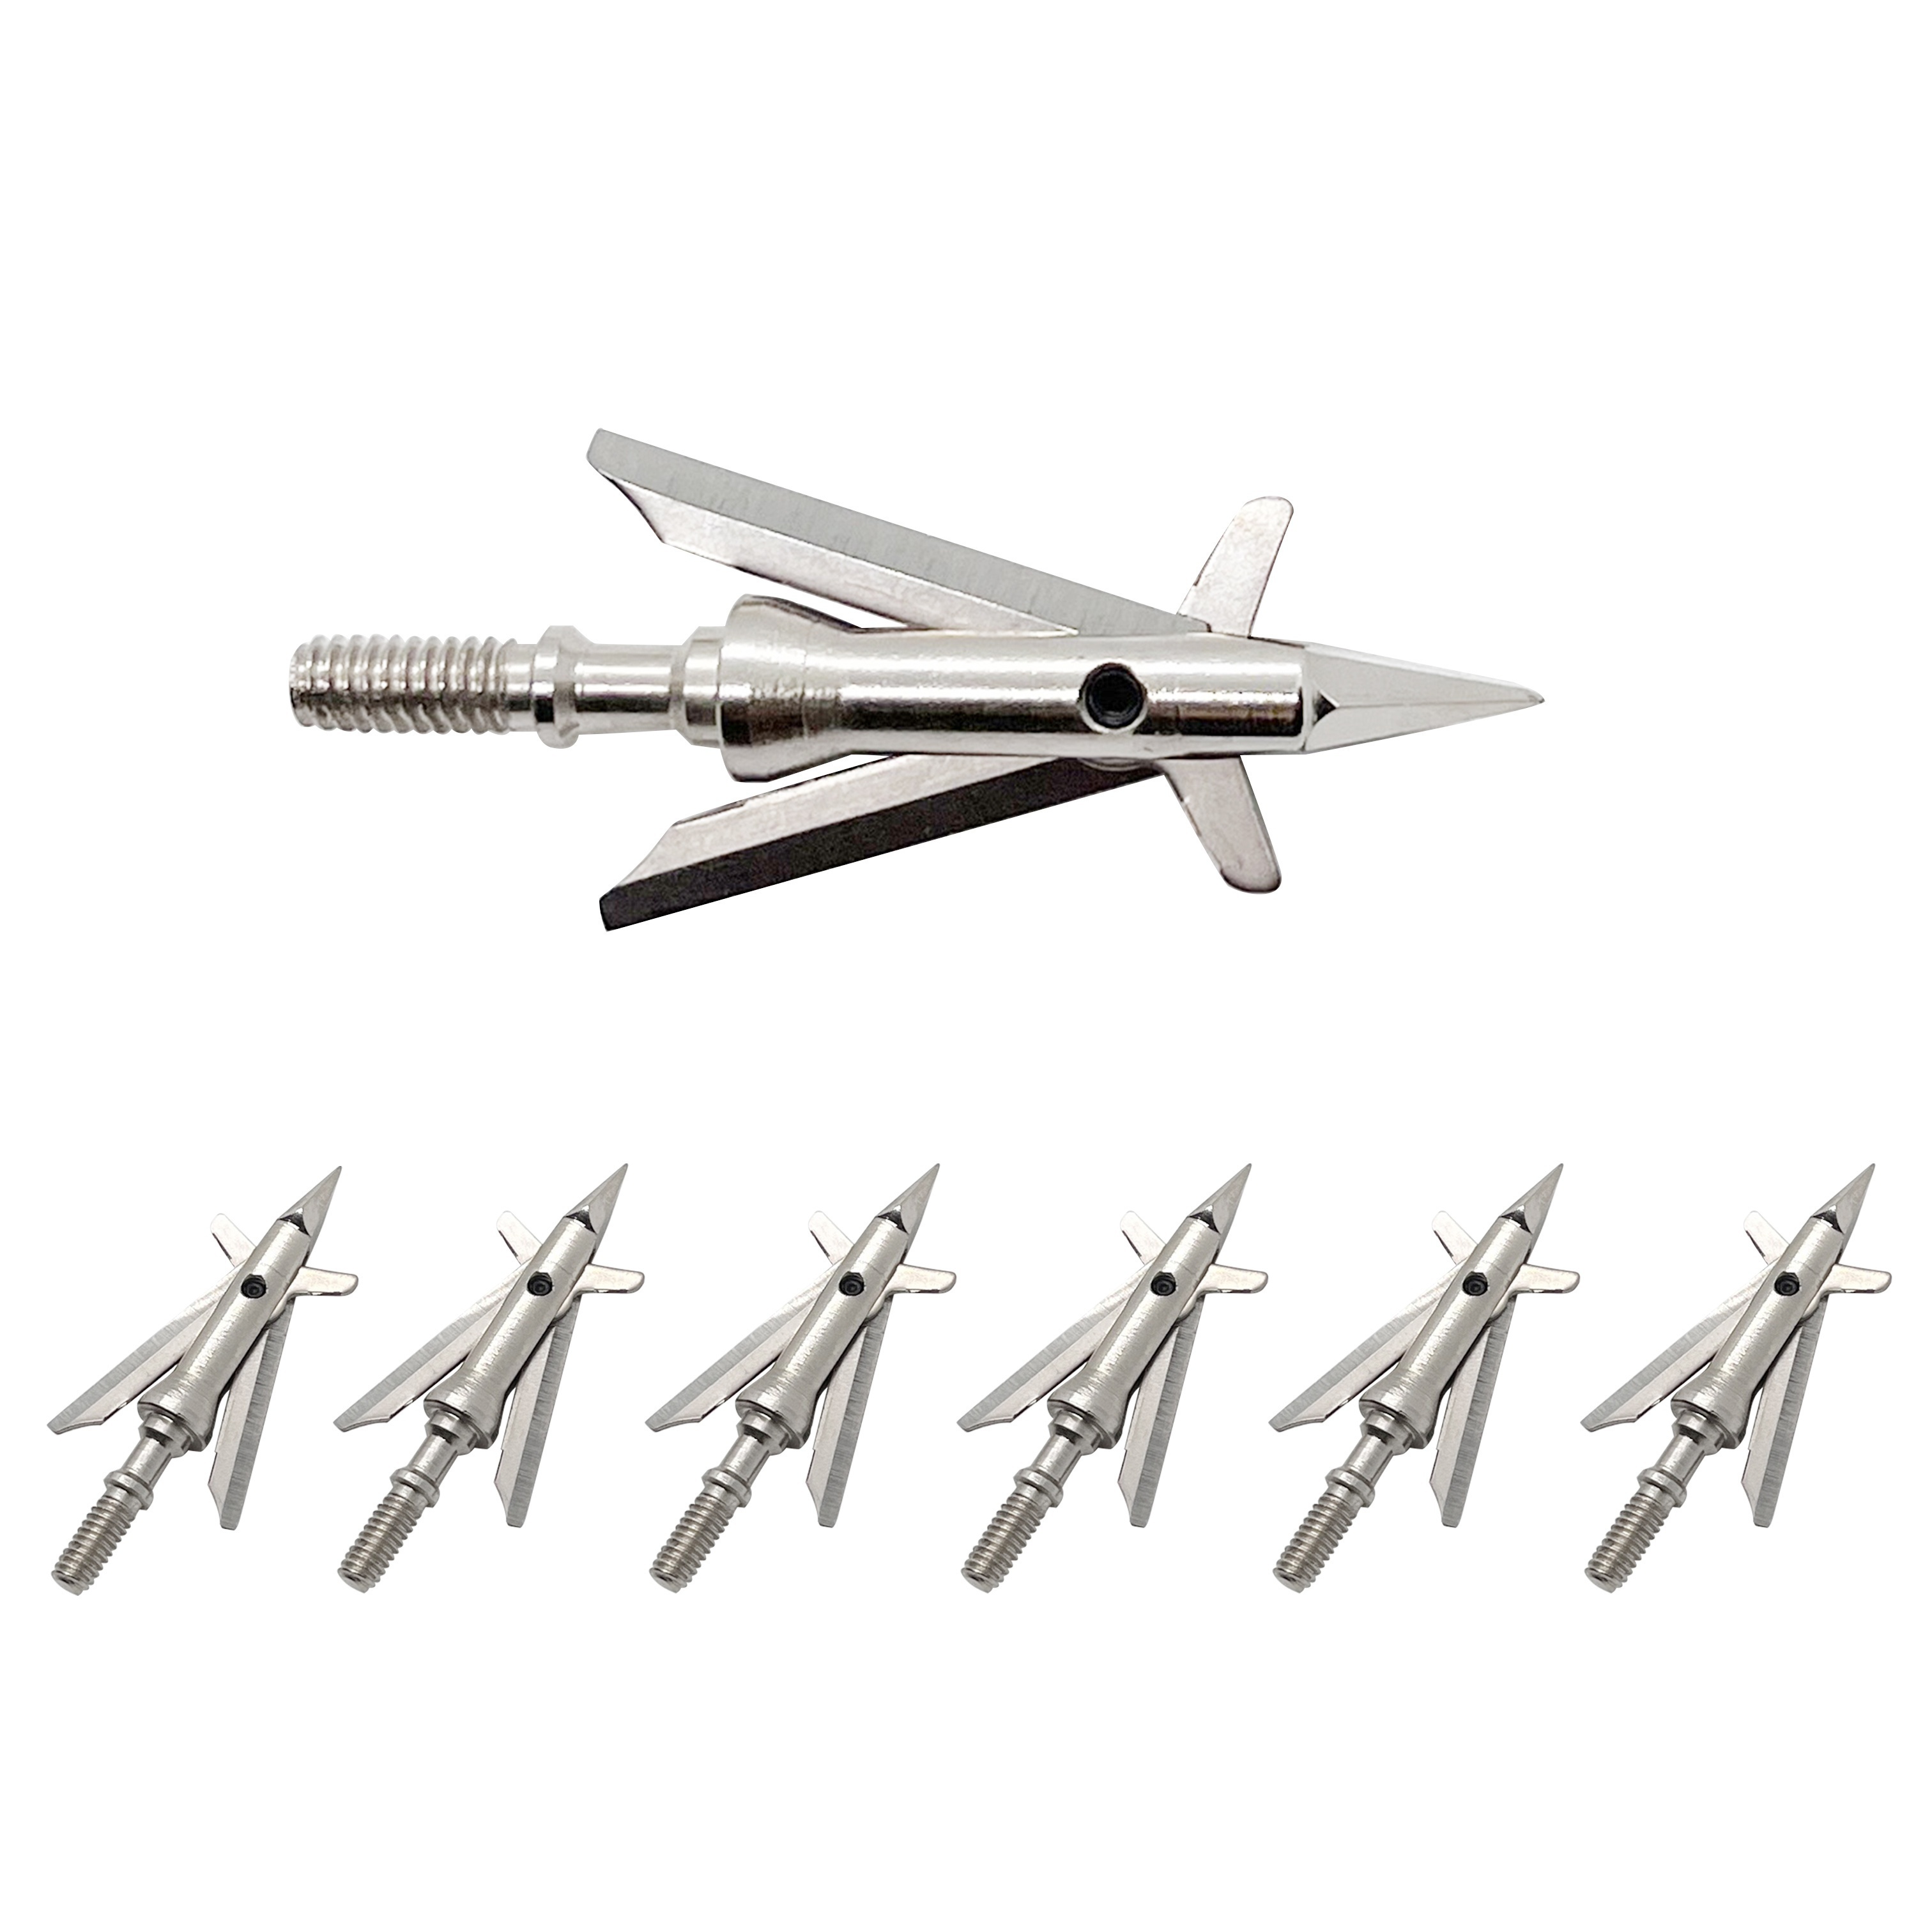 

6 Pk Hunting 100 Grain 2 Mechnical Blade Stainless Steel Arrow Tips Arrowheads For And Compound Bow